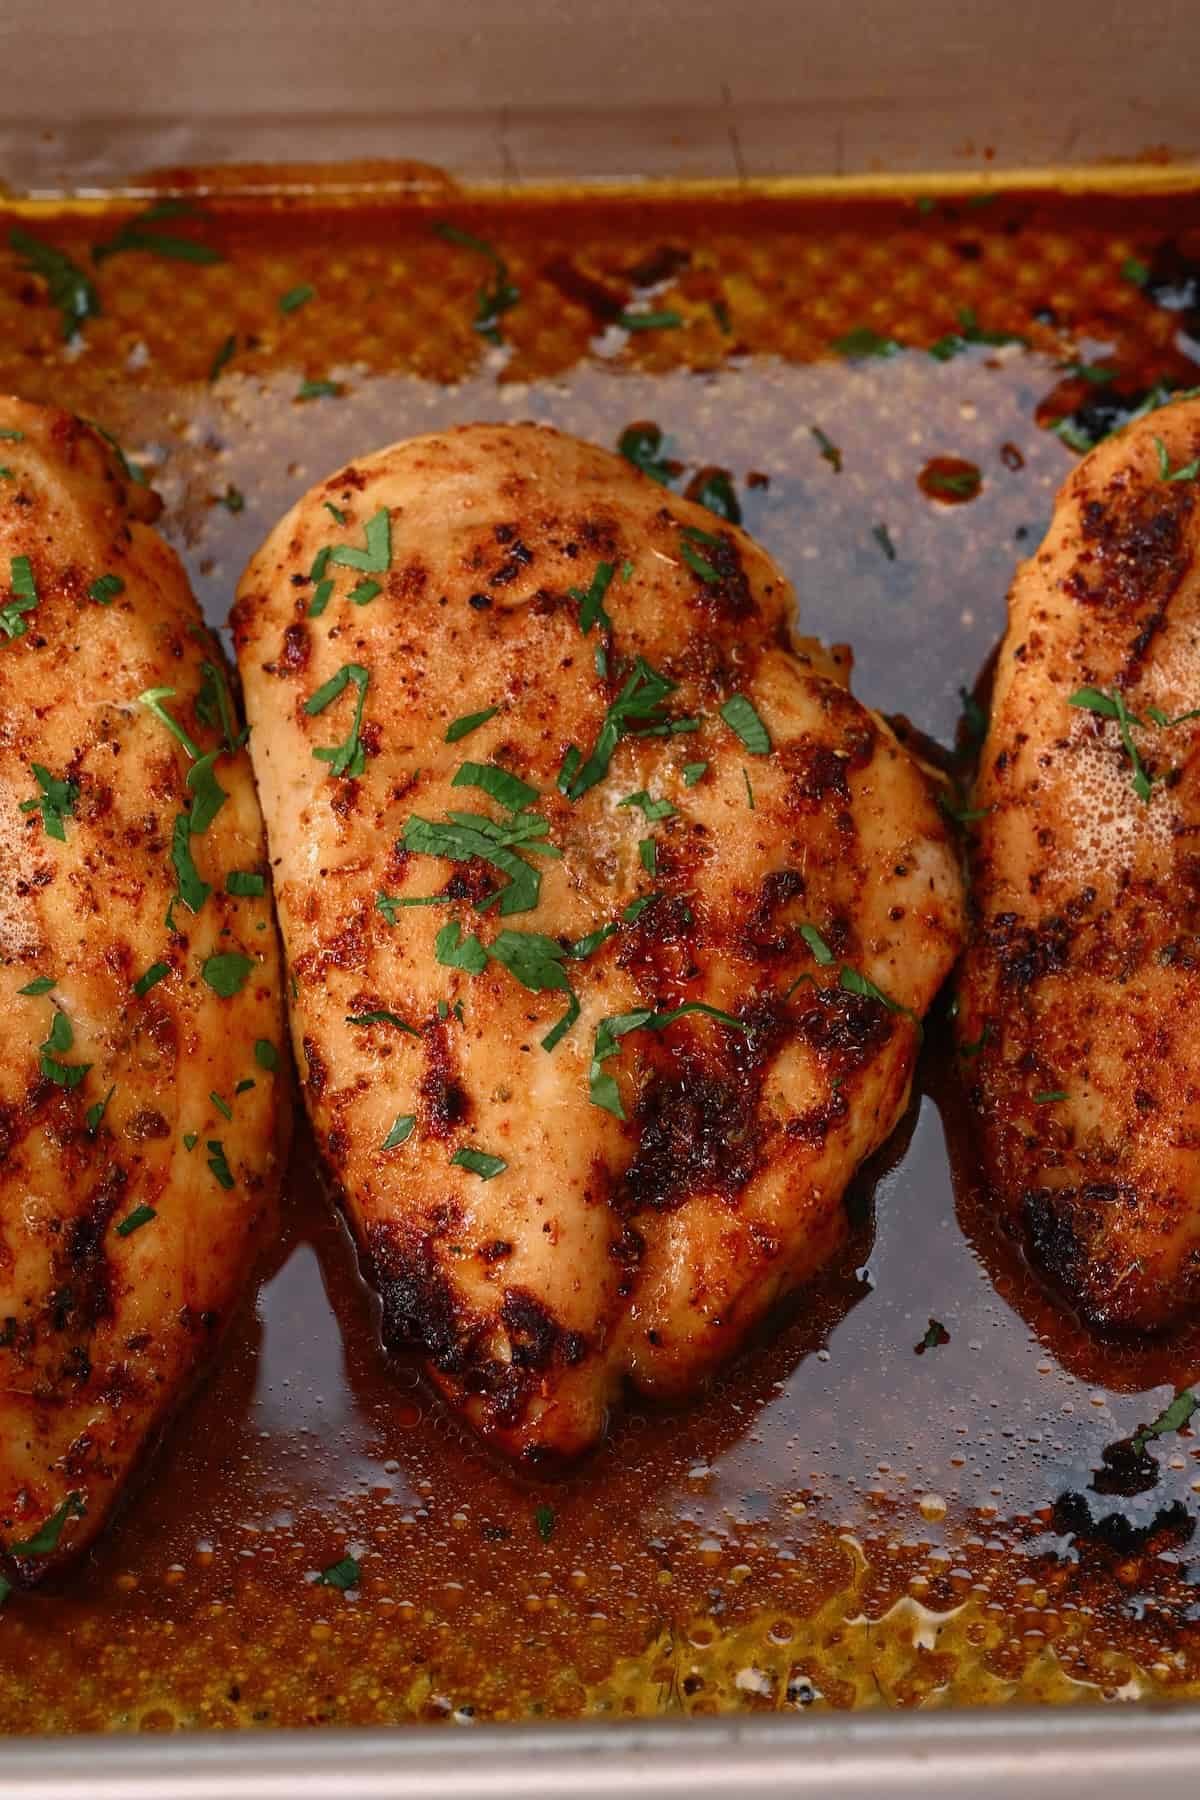 Baked chicken breast in an oven tray